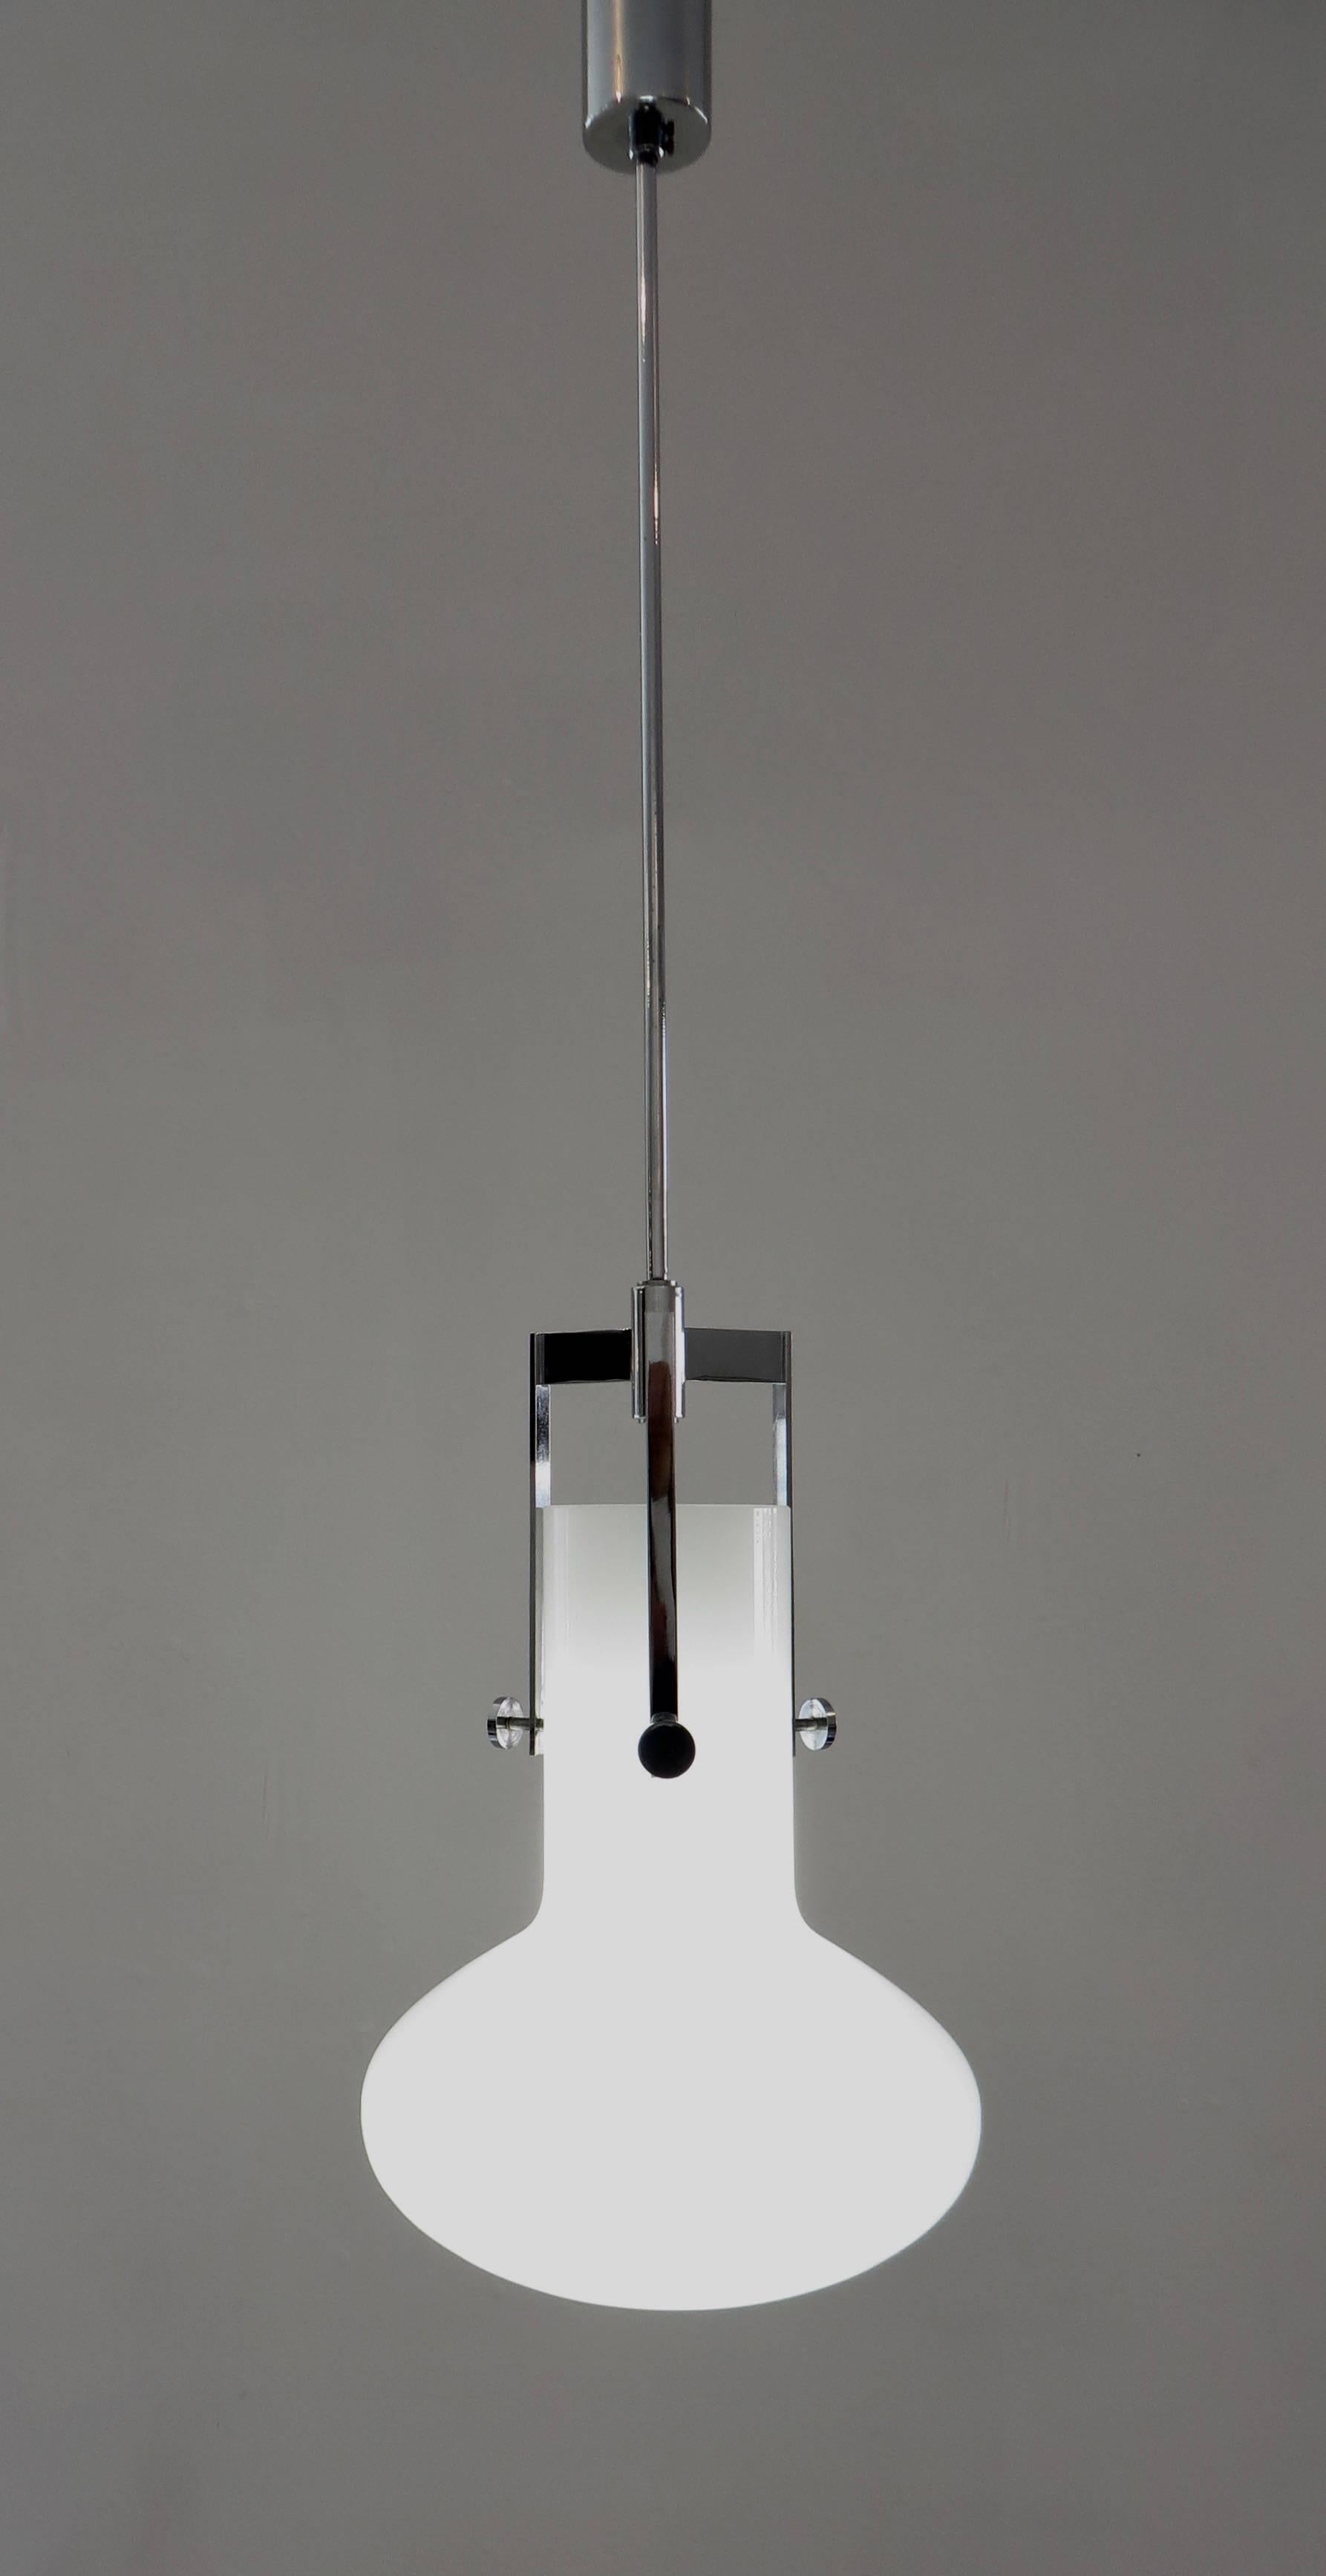 Opaque milk opaline glass and a chrome finish armature designed by Ignazio Gardella for Azucena, Italy, 1958. Single bulb light source. Rewired for USA, can accept any wattage, led.
Overall size as shown:
9